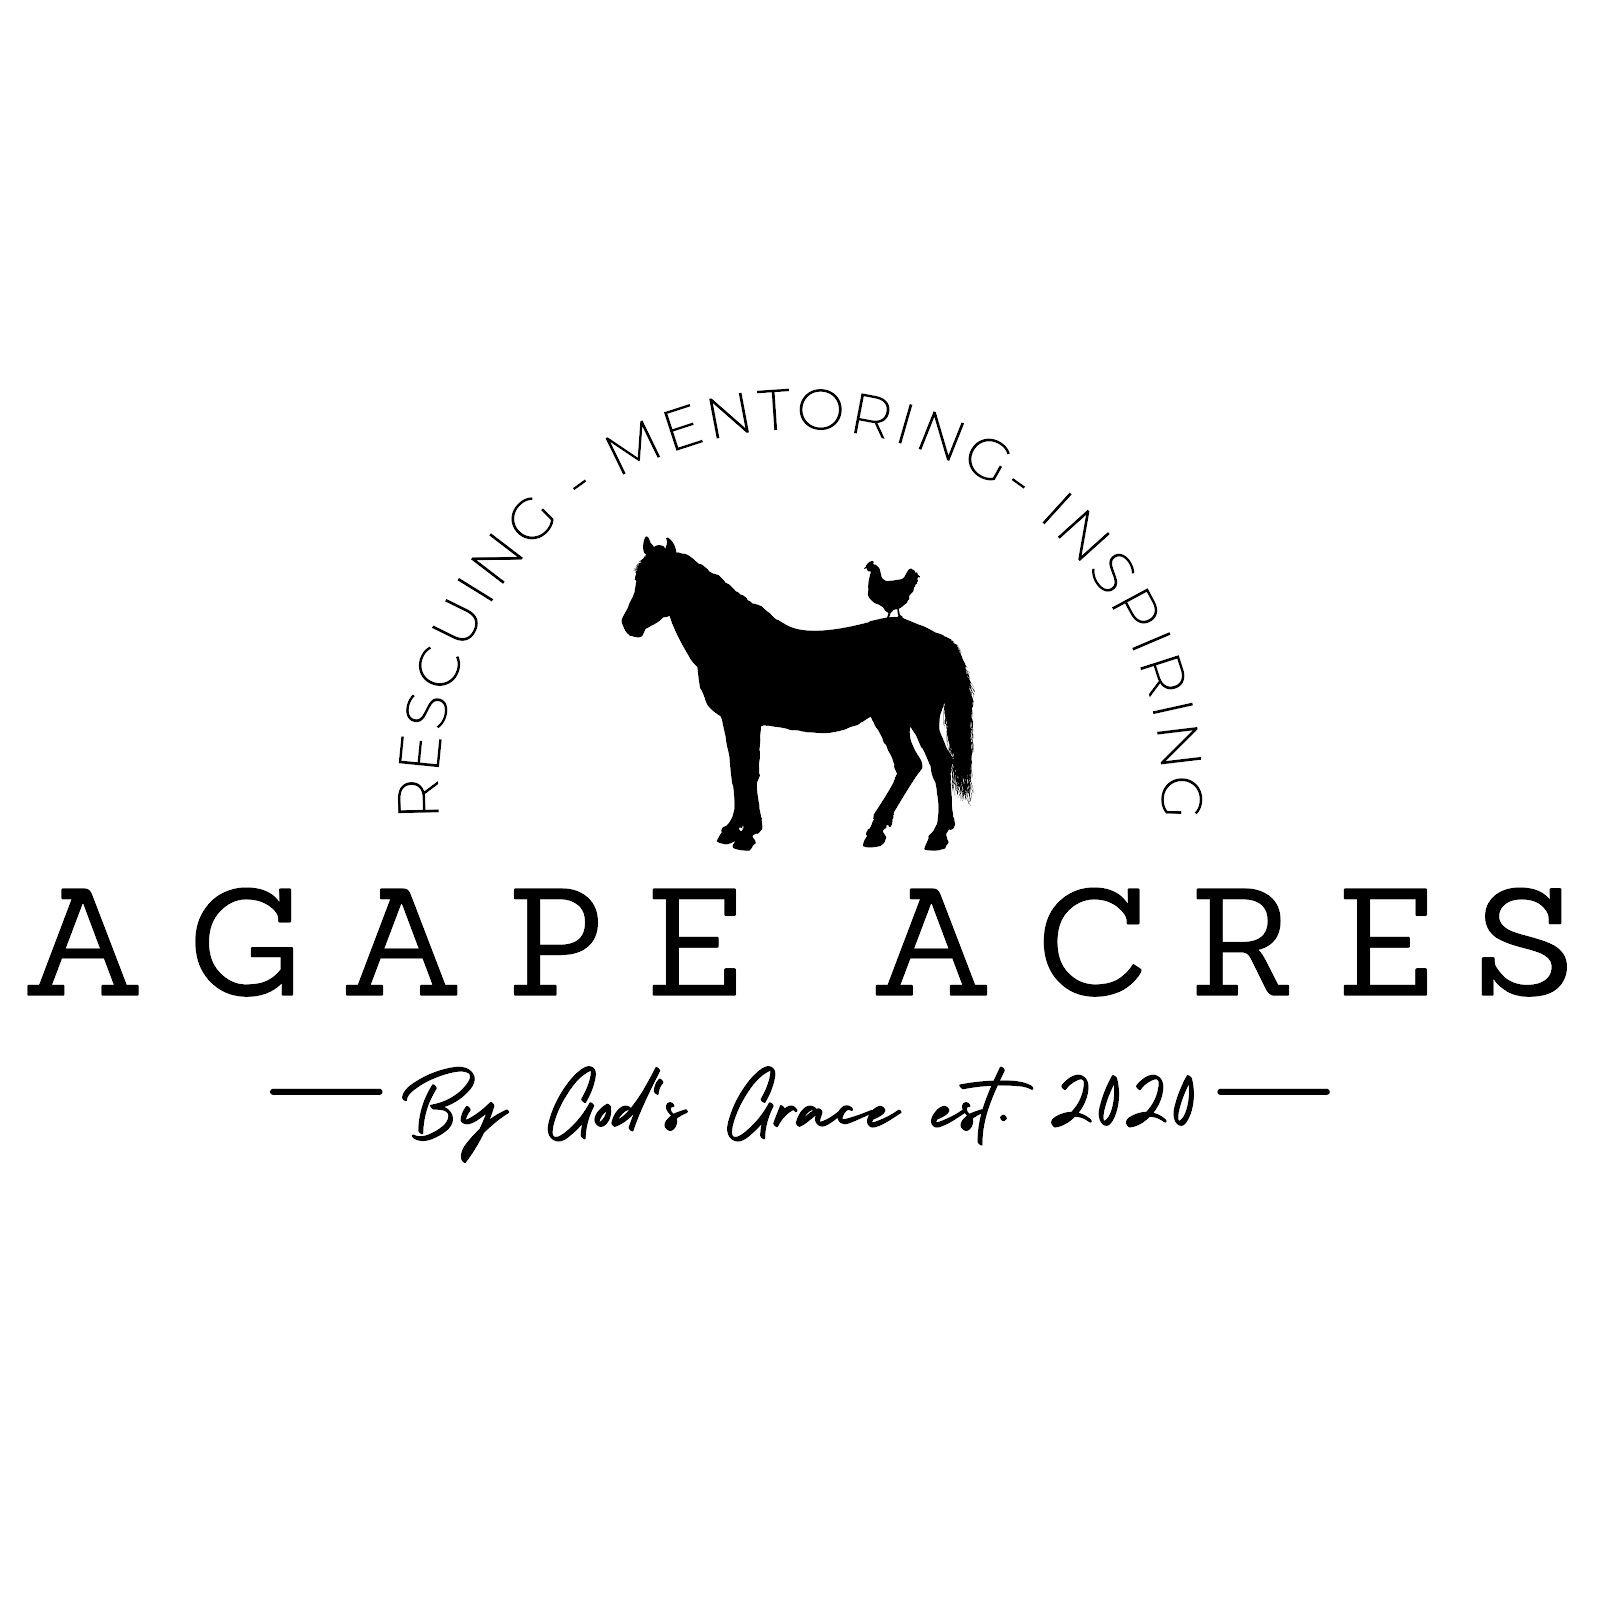 horse image with agape acres name below